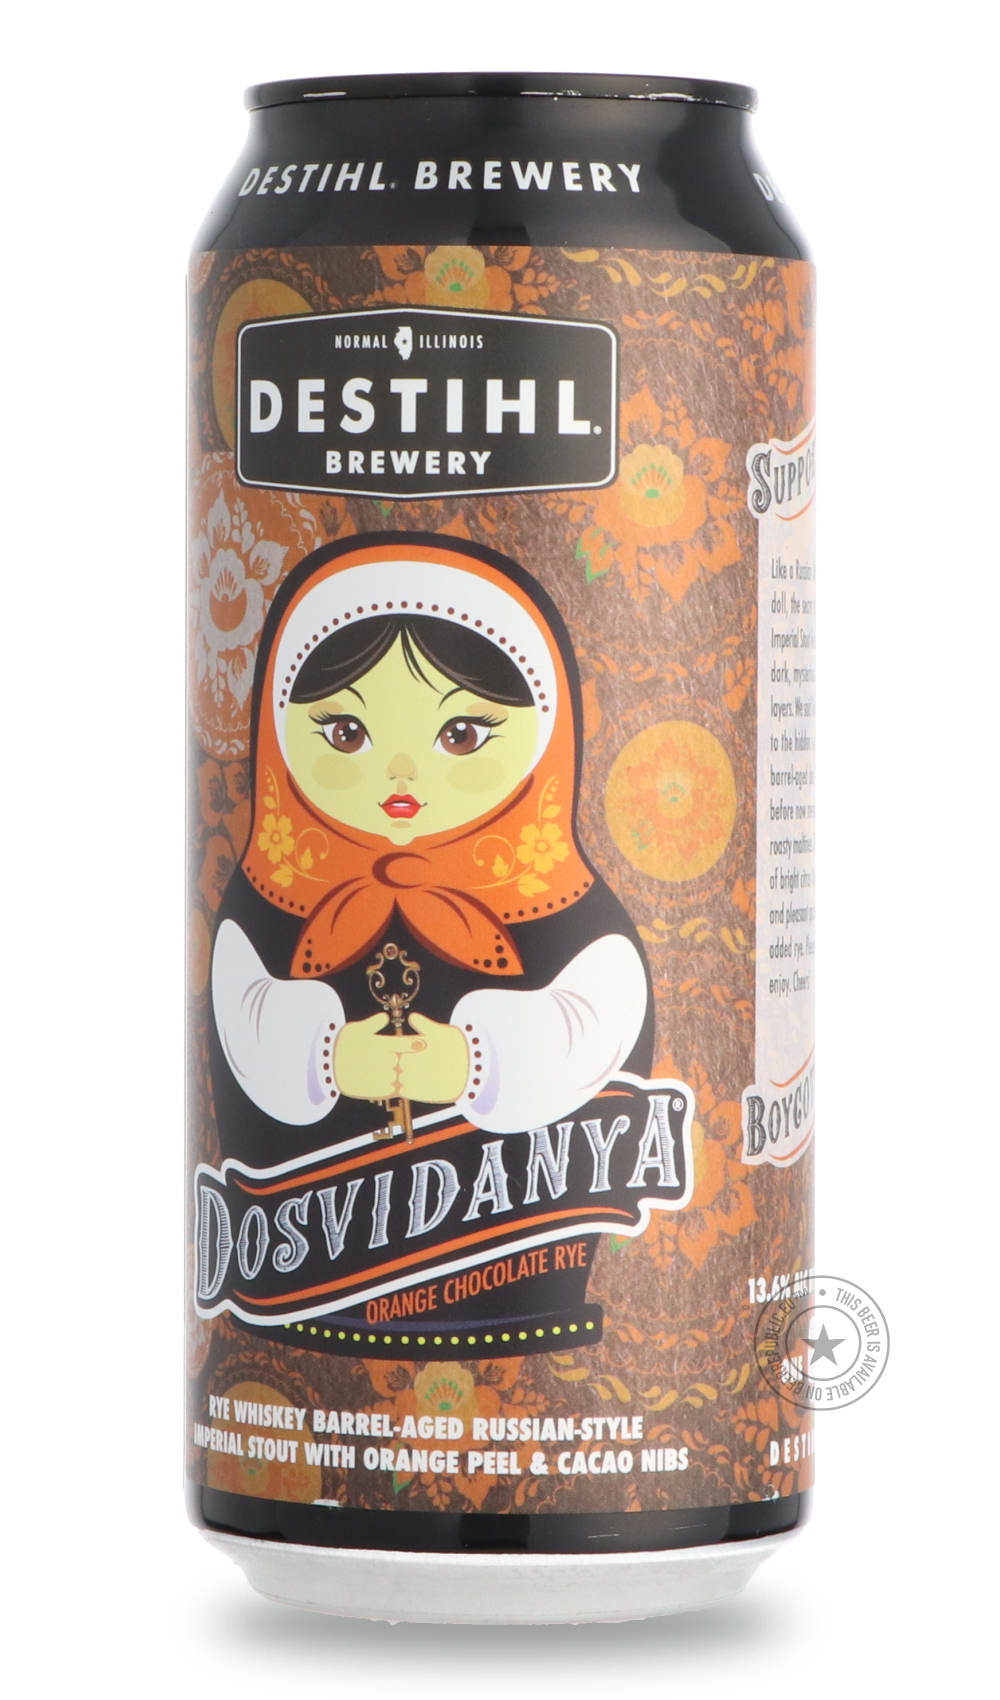 -Destihl- Dosvidanya Orange Chocolate Rye 2020-Stout & Porter- Only @ Beer Republic - The best online beer store for American & Canadian craft beer - Buy beer online from the USA and Canada - Bier online kopen - Amerikaans bier kopen - Craft beer store - Craft beer kopen - Amerikanisch bier kaufen - Bier online kaufen - Acheter biere online - IPA - Stout - Porter - New England IPA - Hazy IPA - Imperial Stout - Barrel Aged - Barrel Aged Imperial Stout - Brown - Dark beer - Blond - Blonde - Pilsner - Lager - 